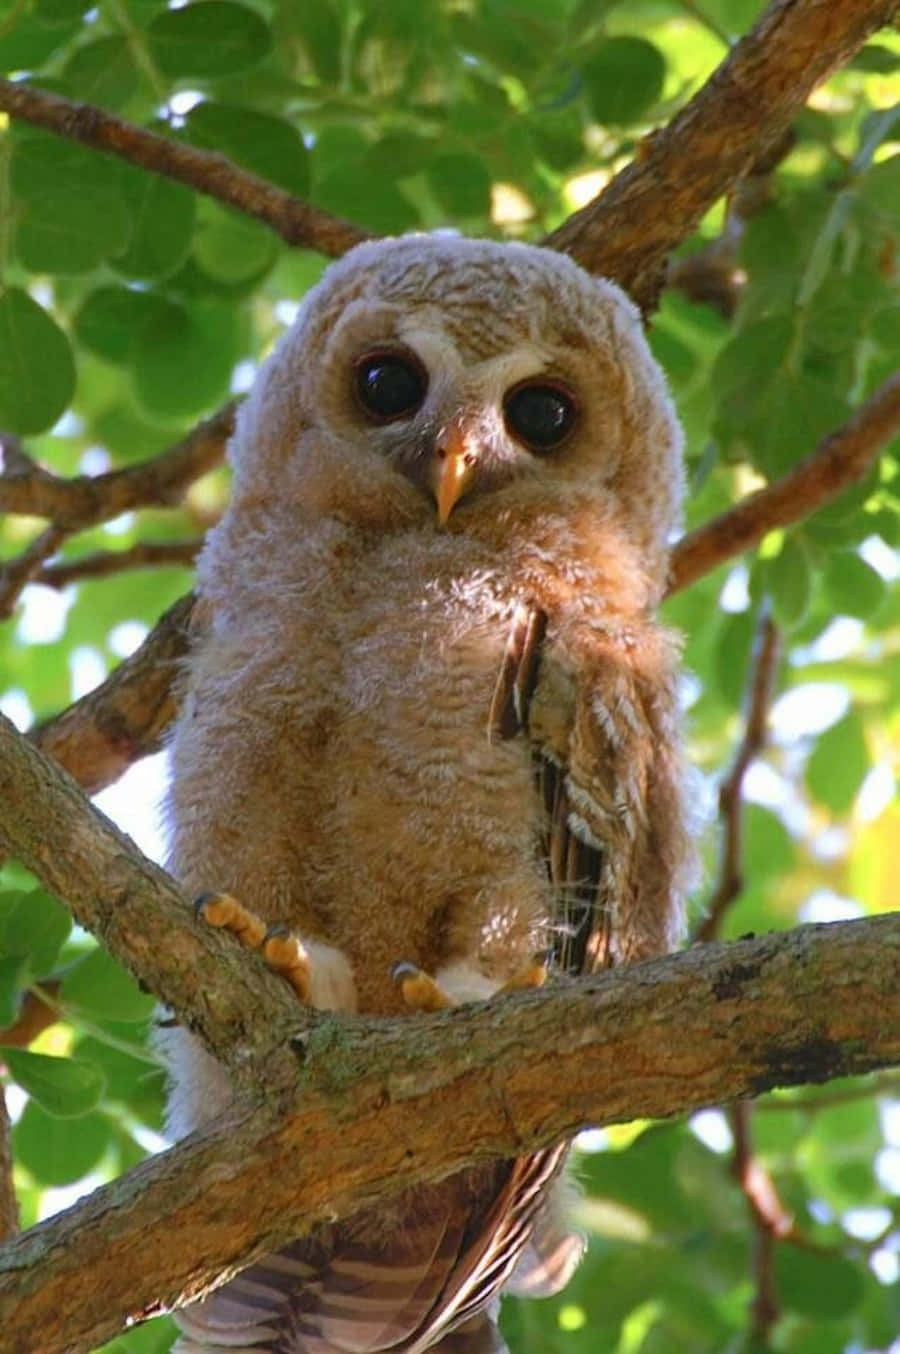 A Young Owl Looking Upward